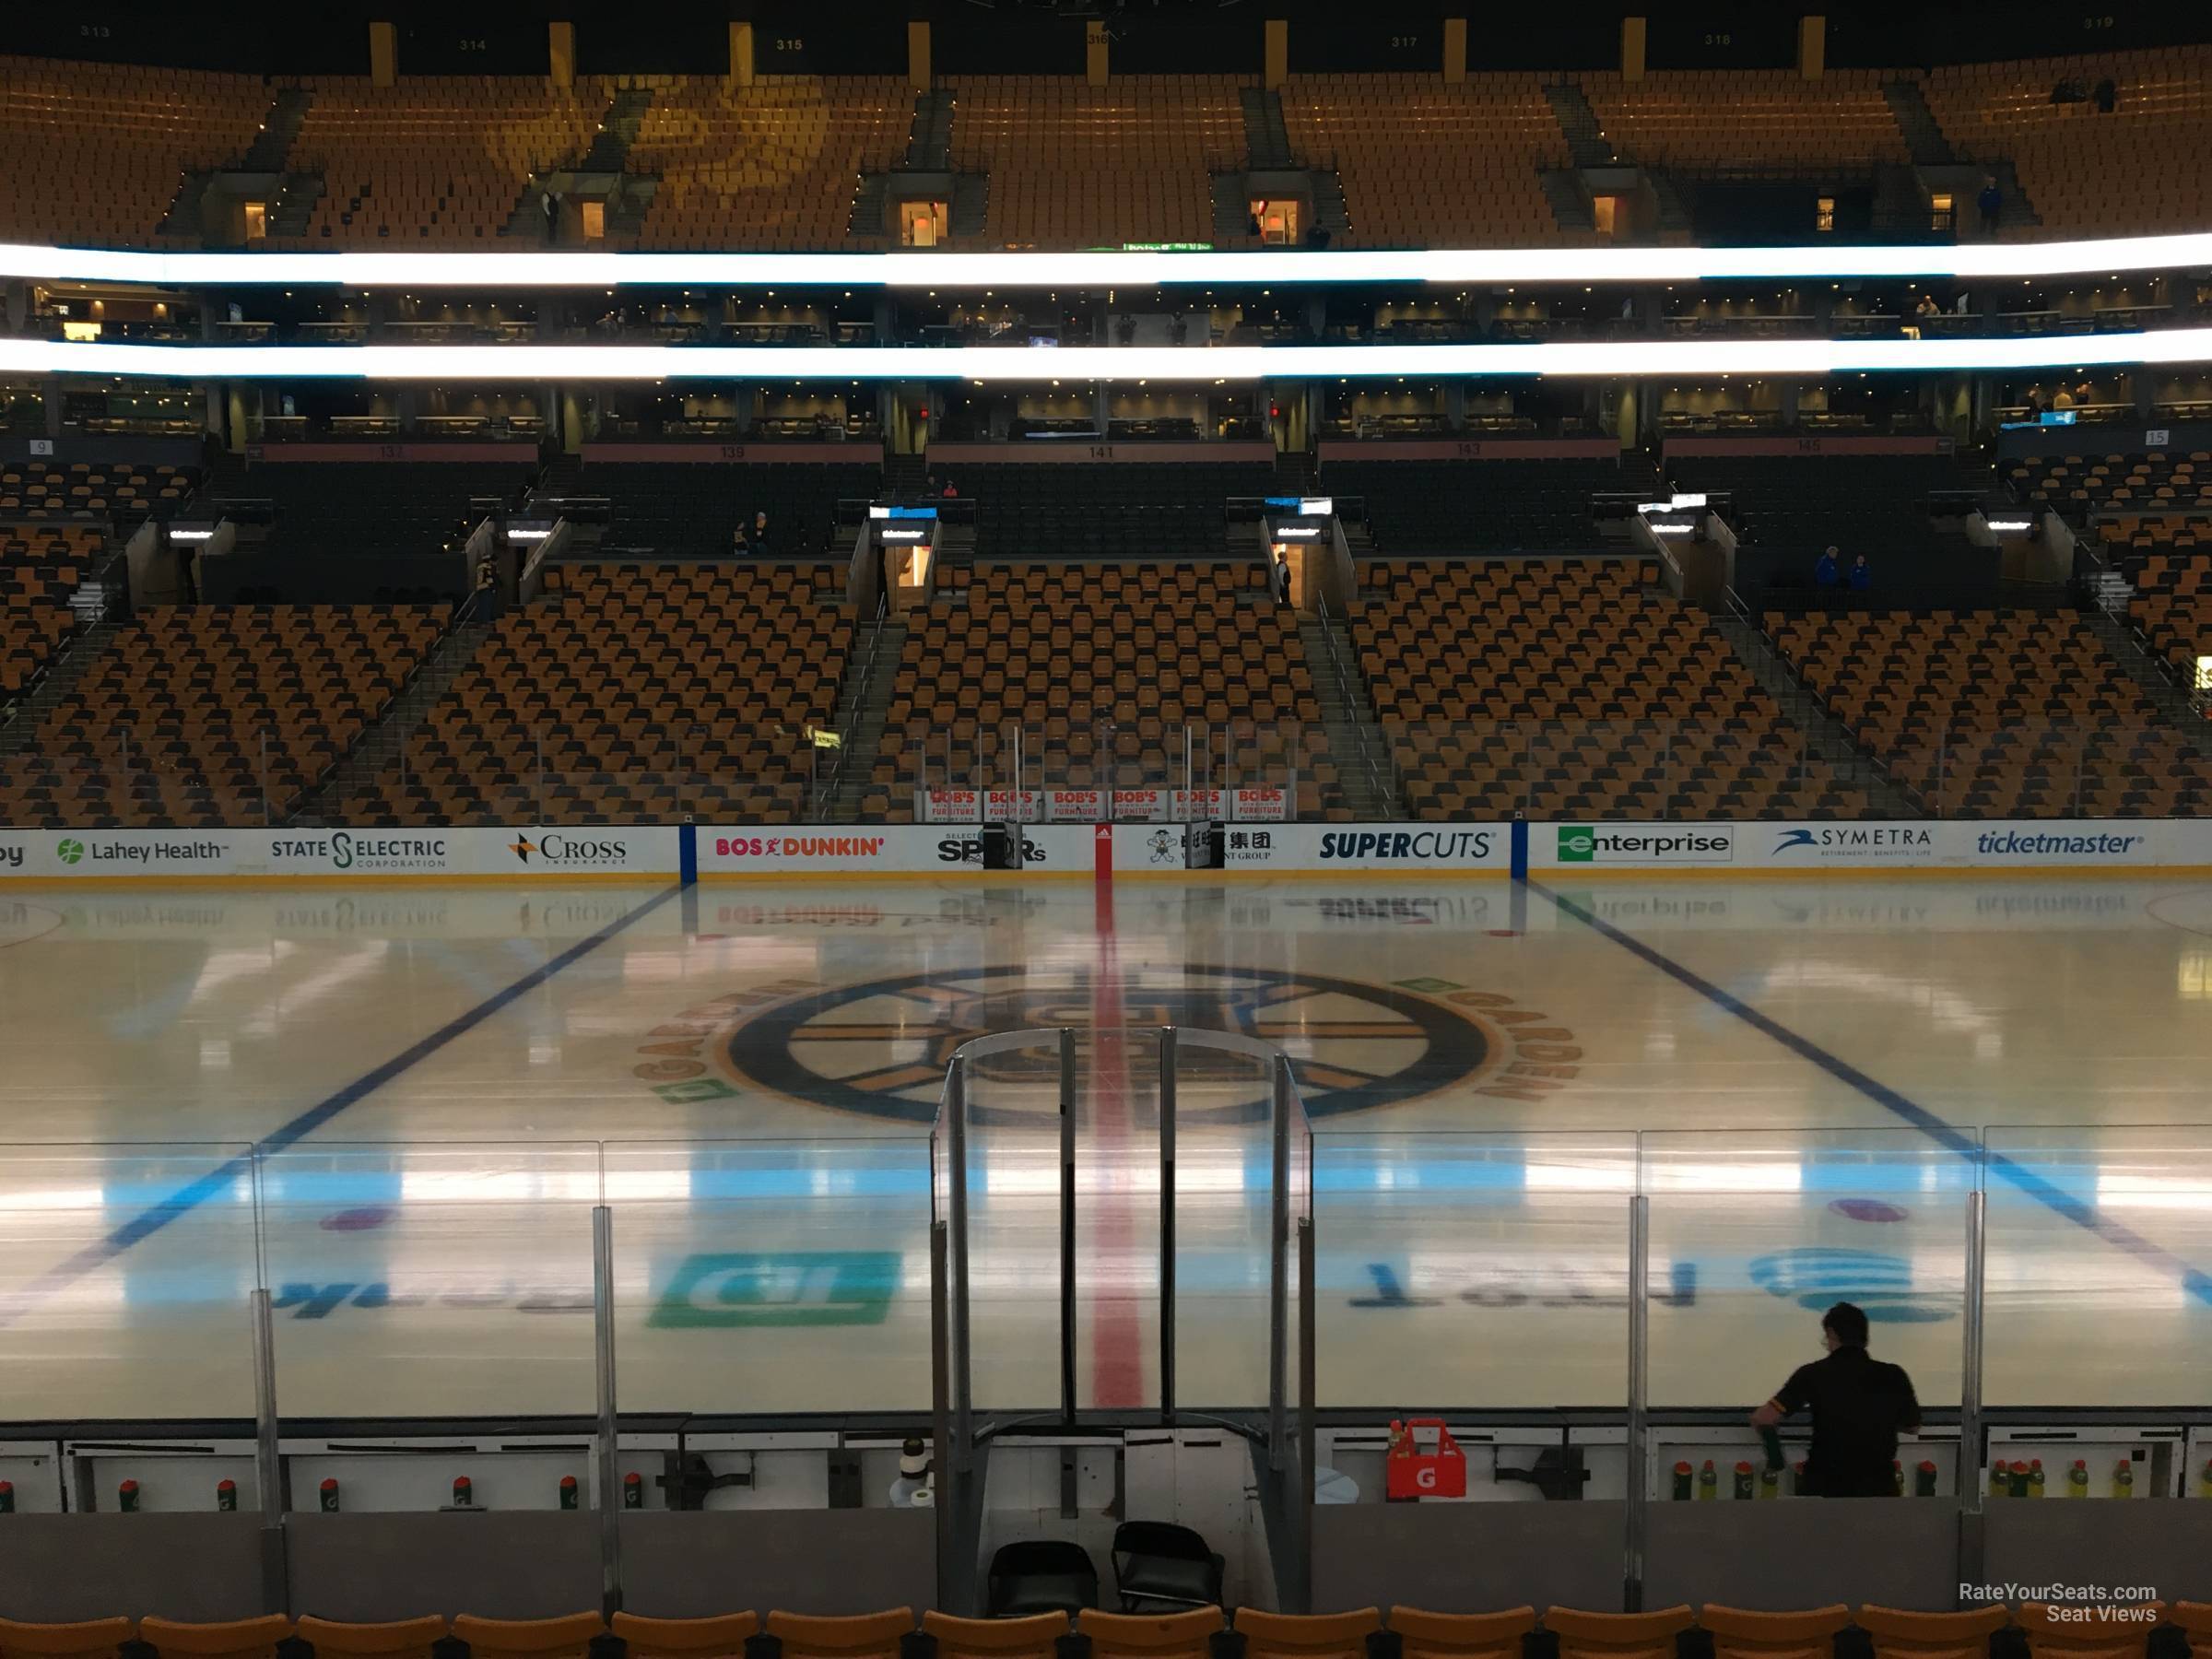 loge 1, row 10 seat view  for hockey - td garden